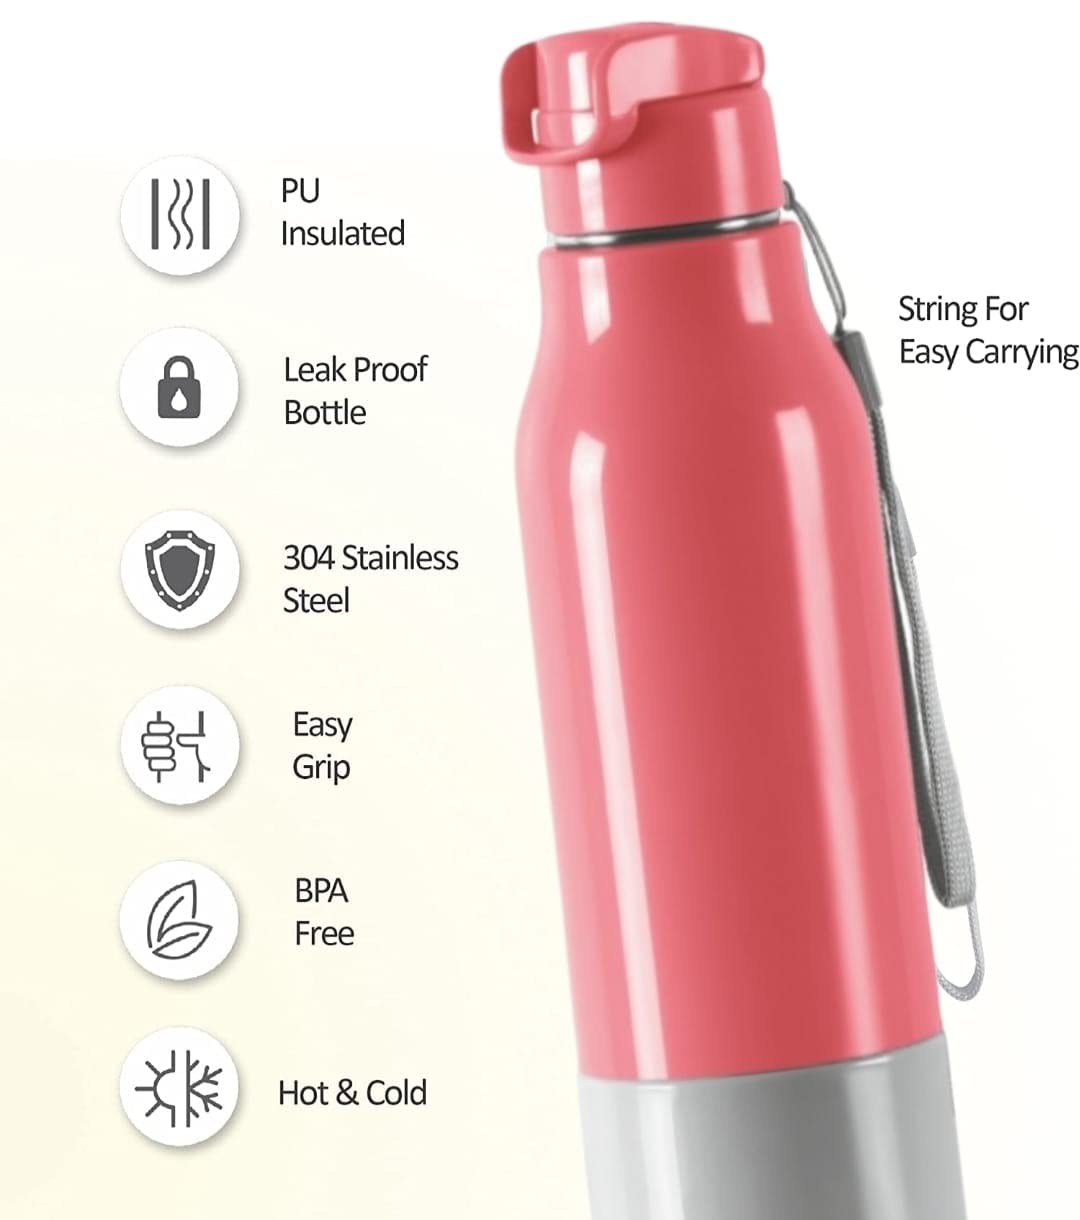 Milton Steel Sprint 900 Insulated Inner Stainless Steel Hot or Cold Leak Proof Water Bottle, 630 ML, Pink